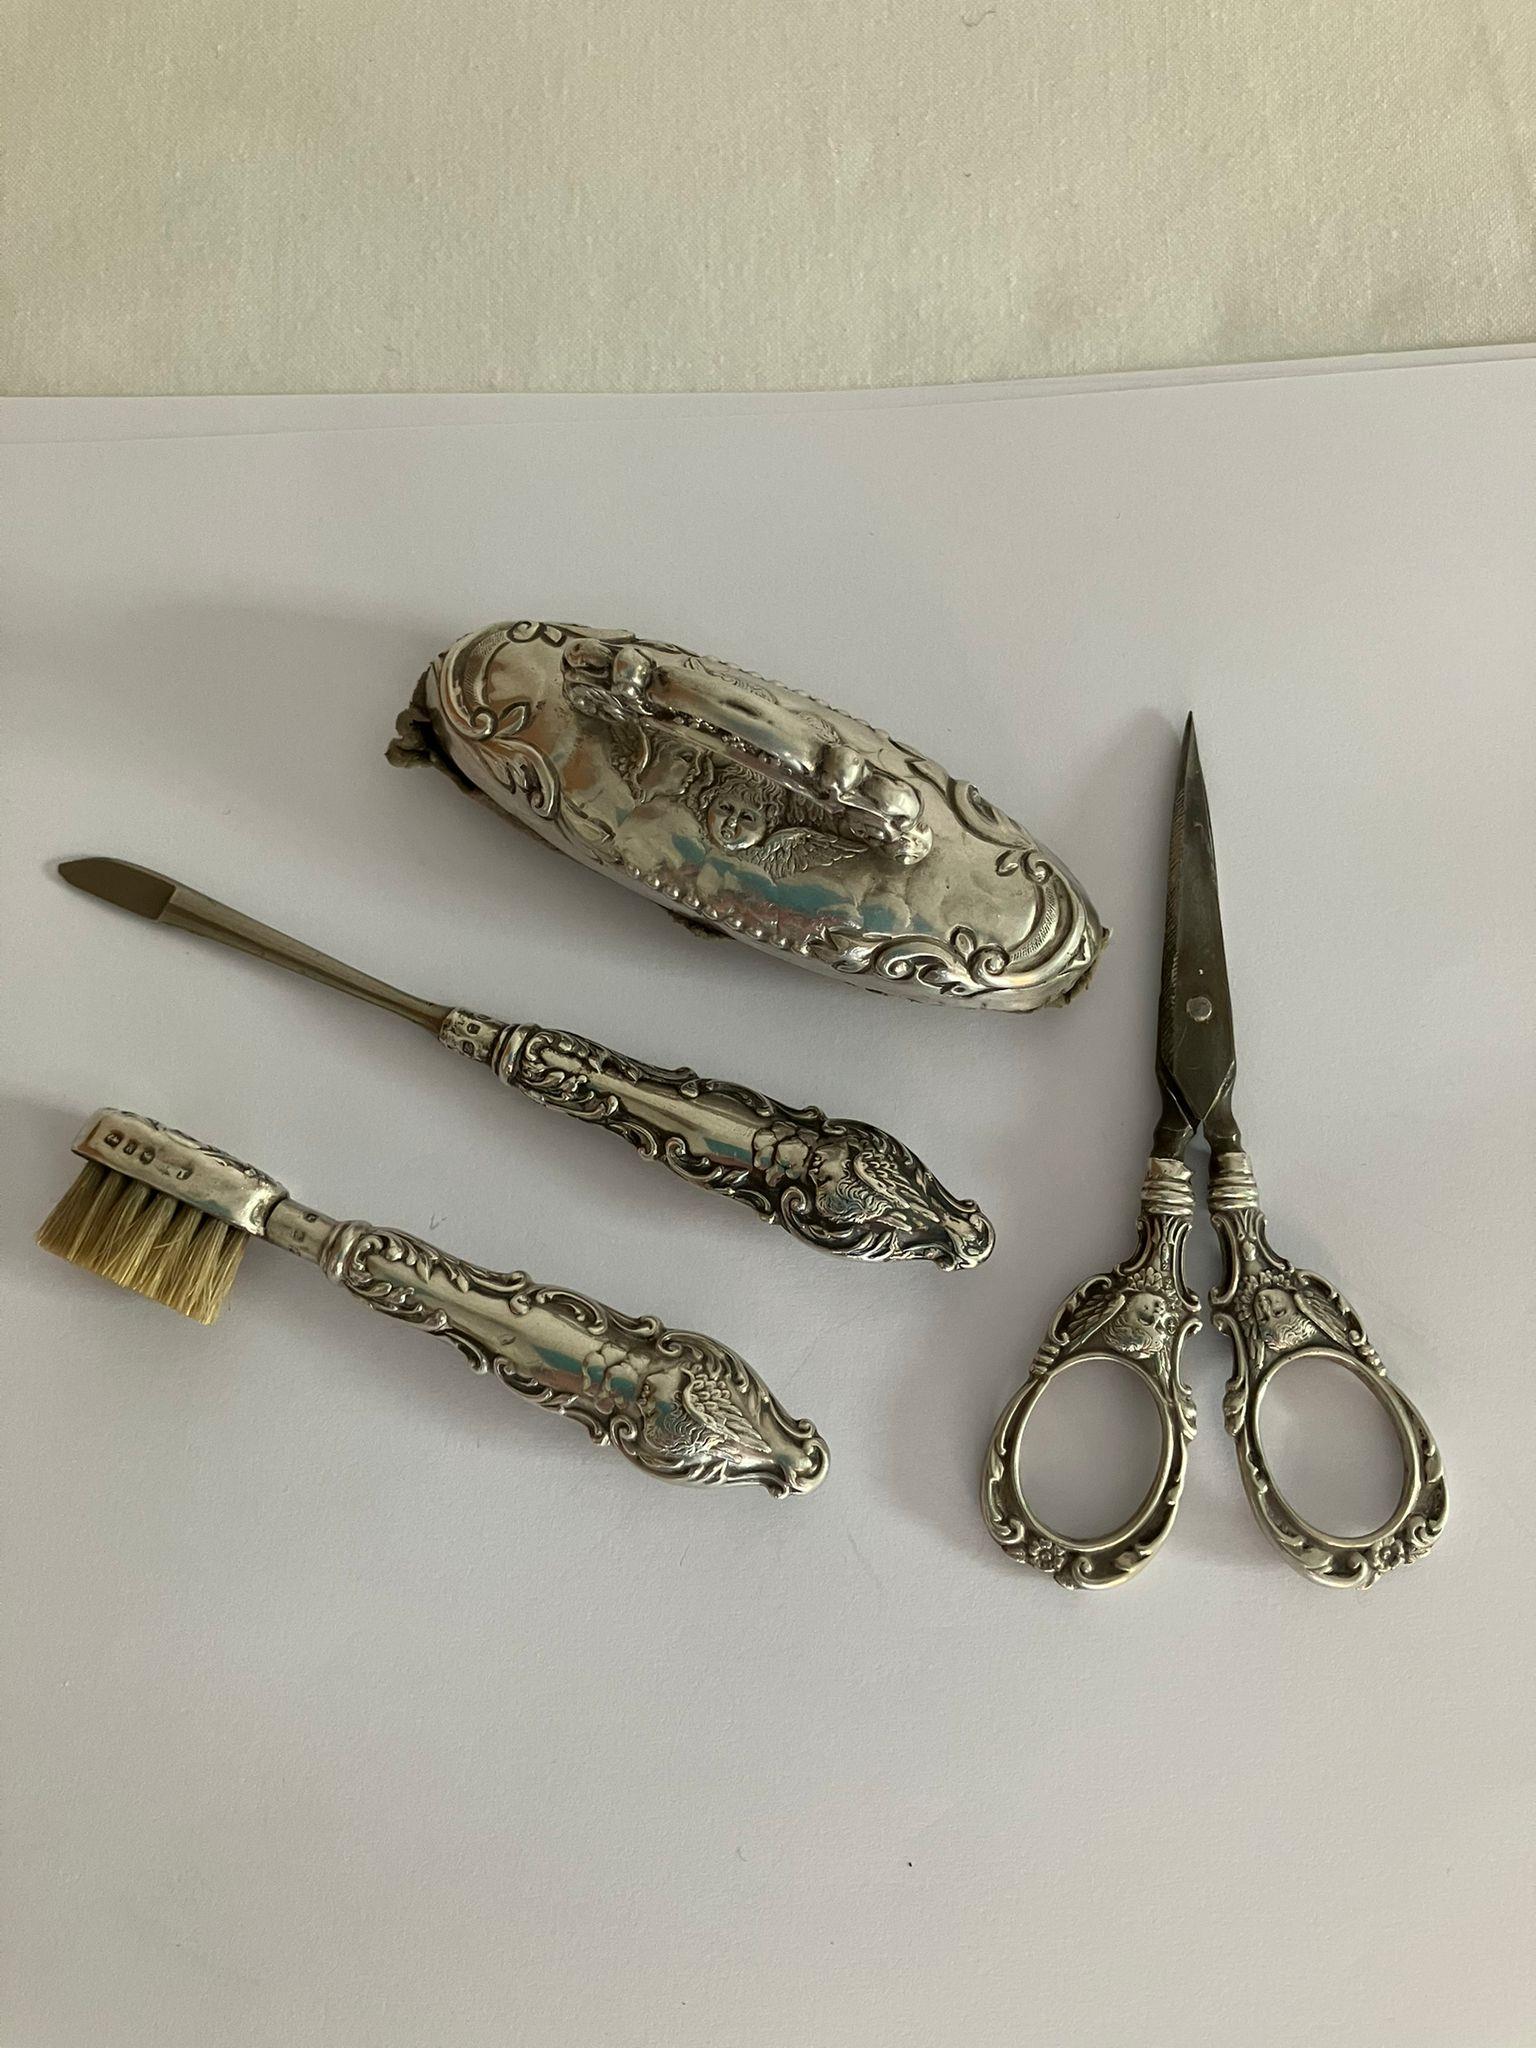 Ladies antique SILVER HANDLED MANICURE/GROOMING set, together with a pair of SILVER handled - Image 4 of 4